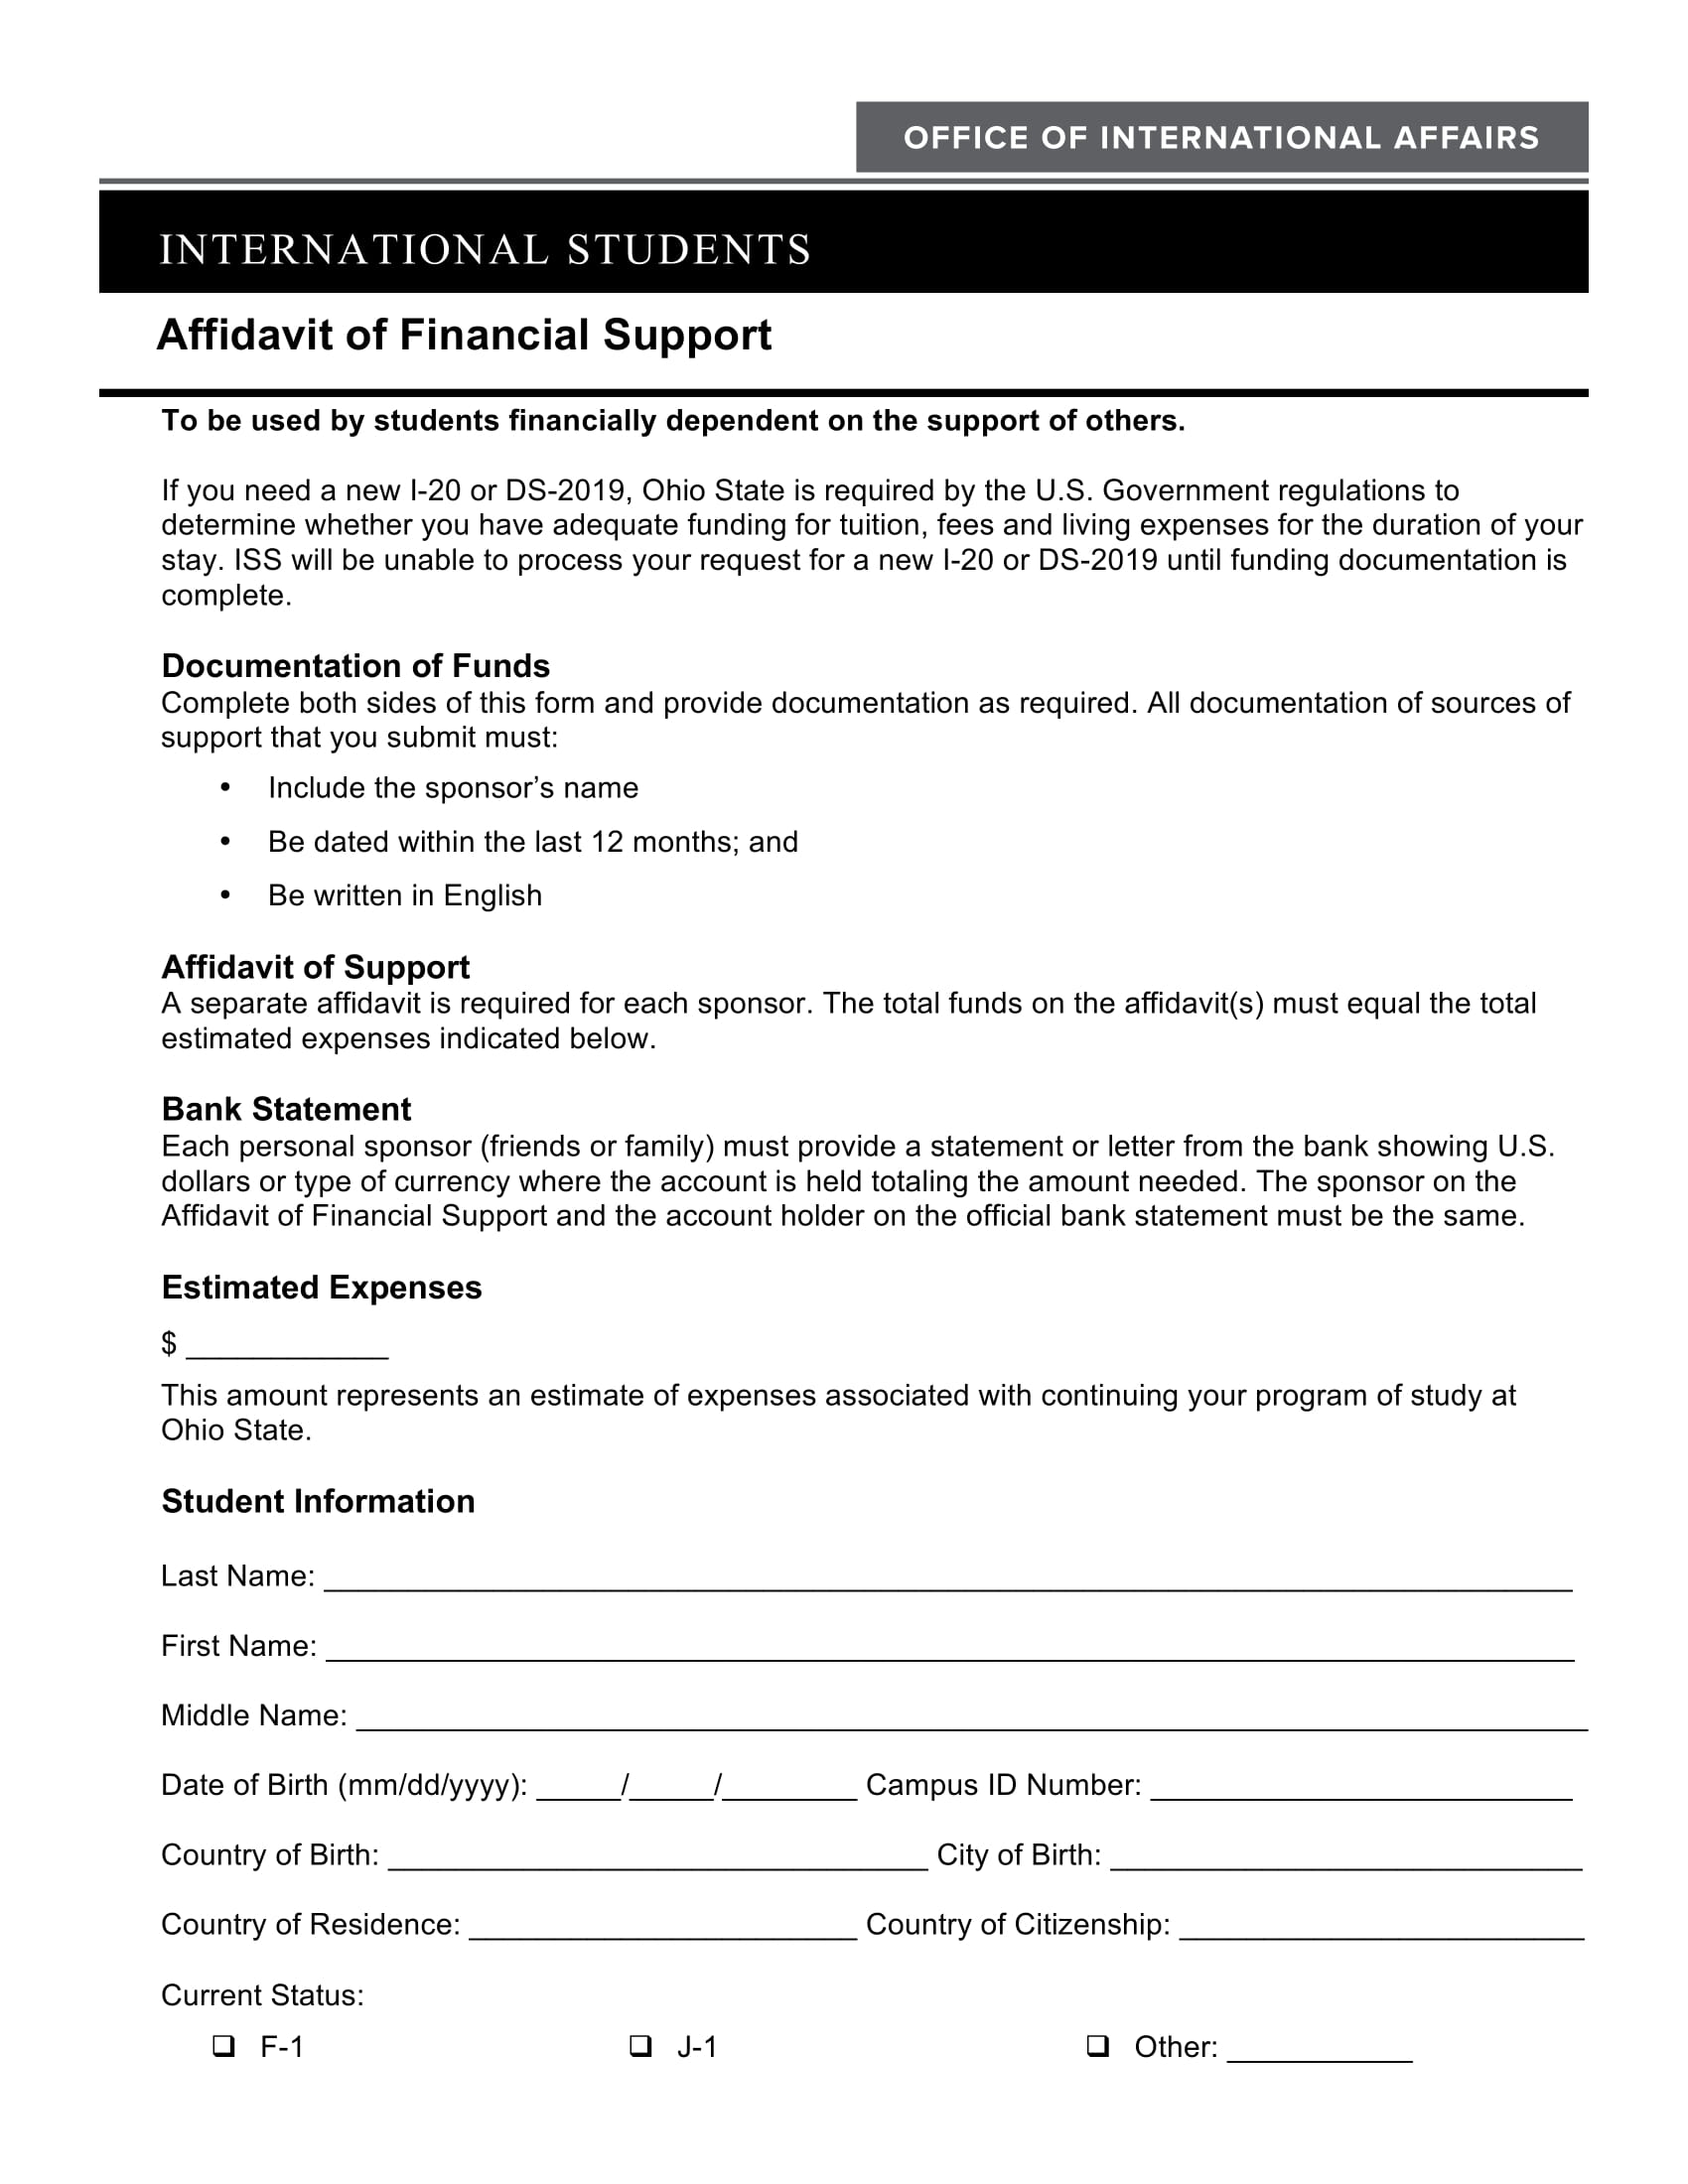 29+ Affidavit of Financial Support Examples - PDF  Examples